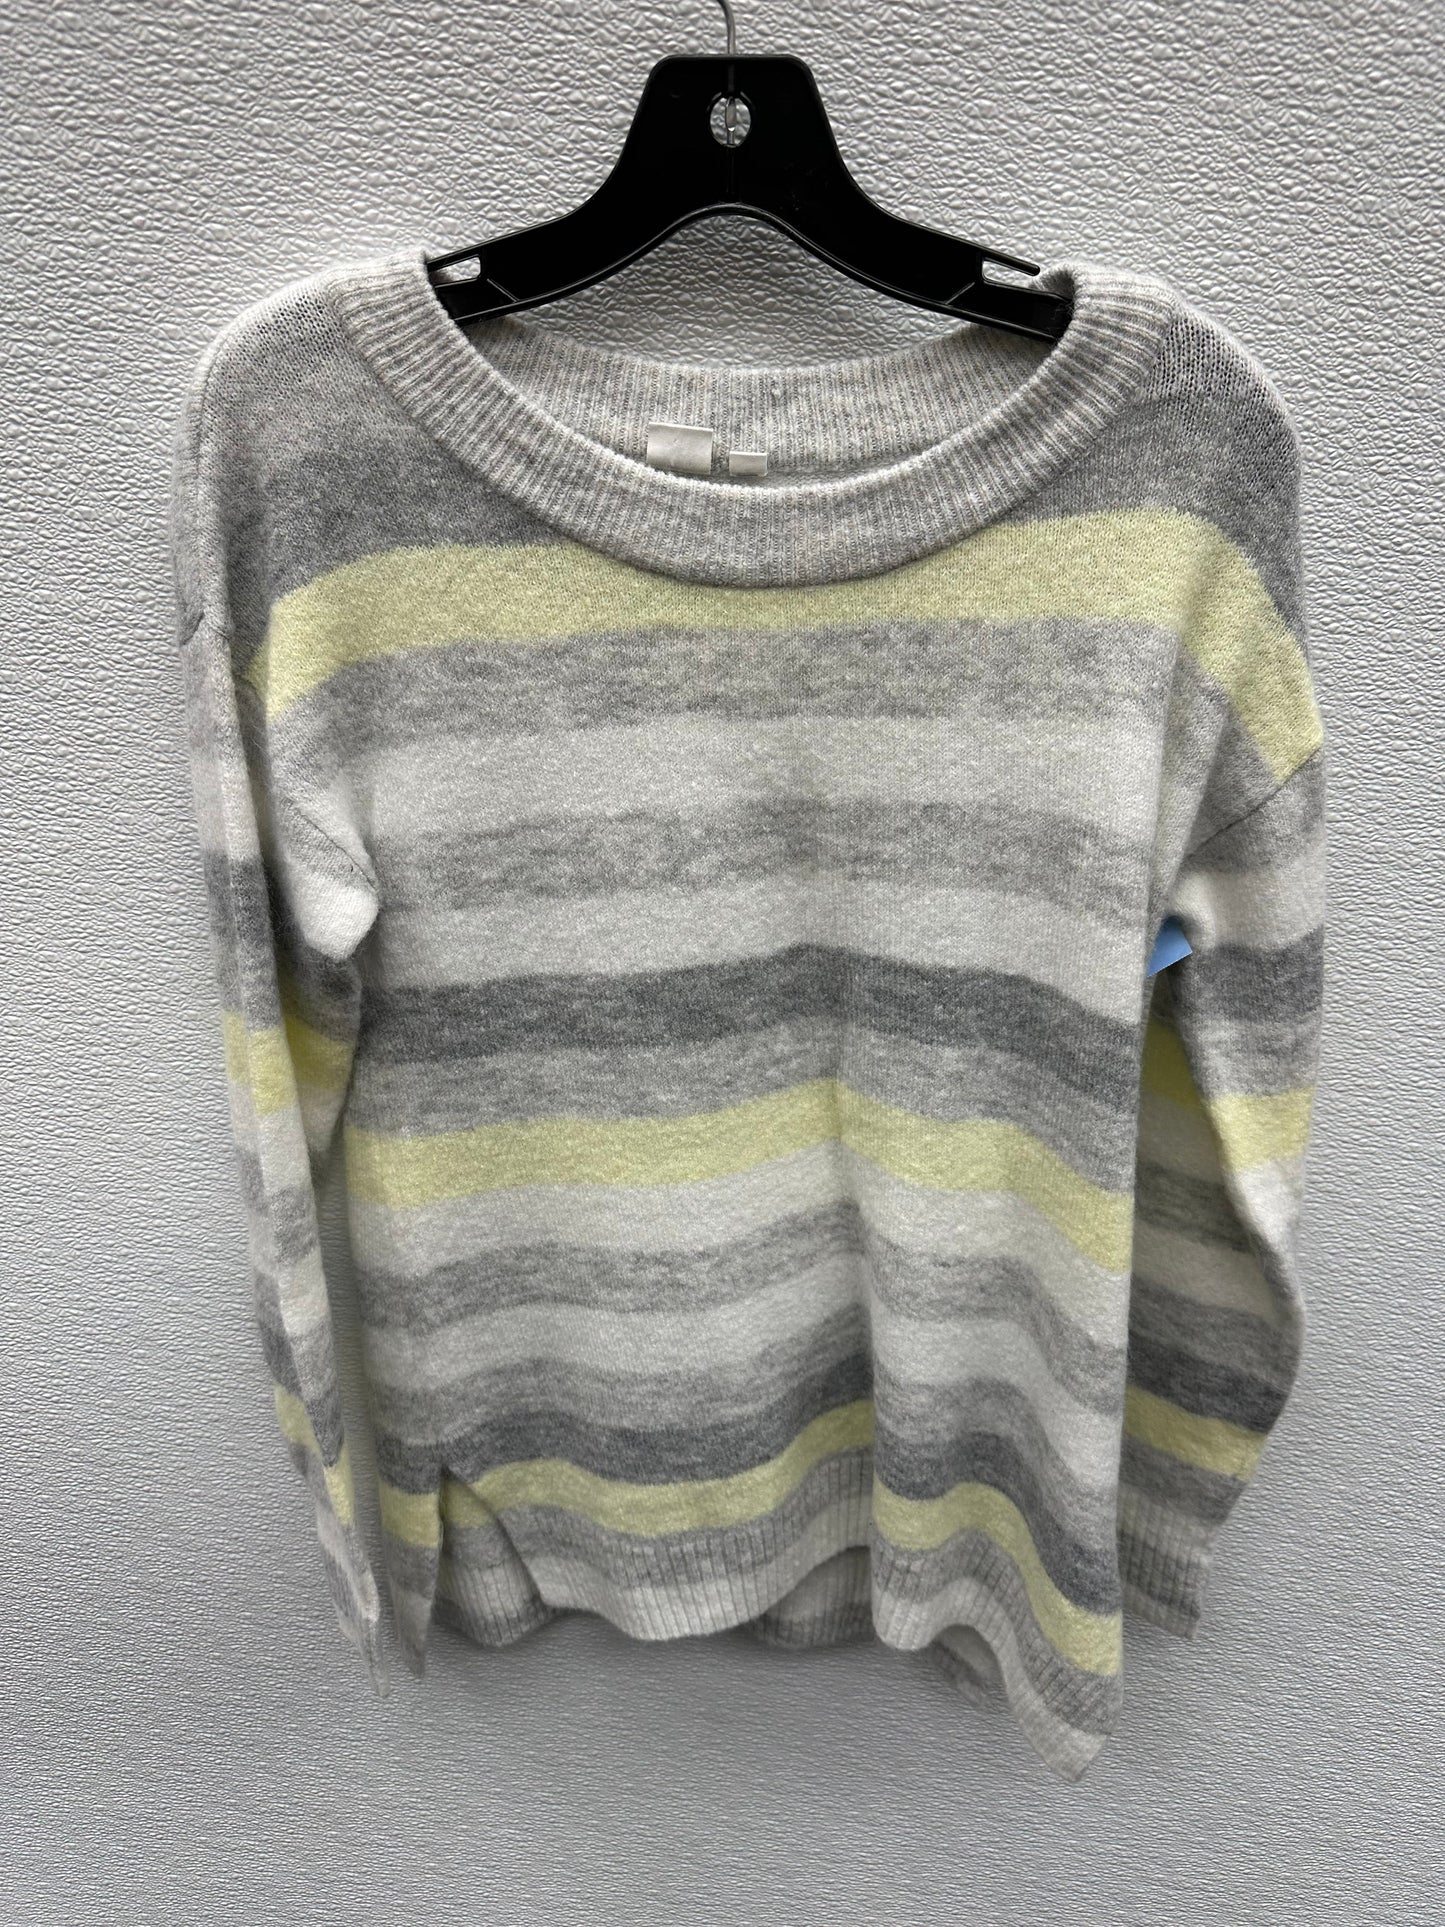 Sweater By Gap  Size: S